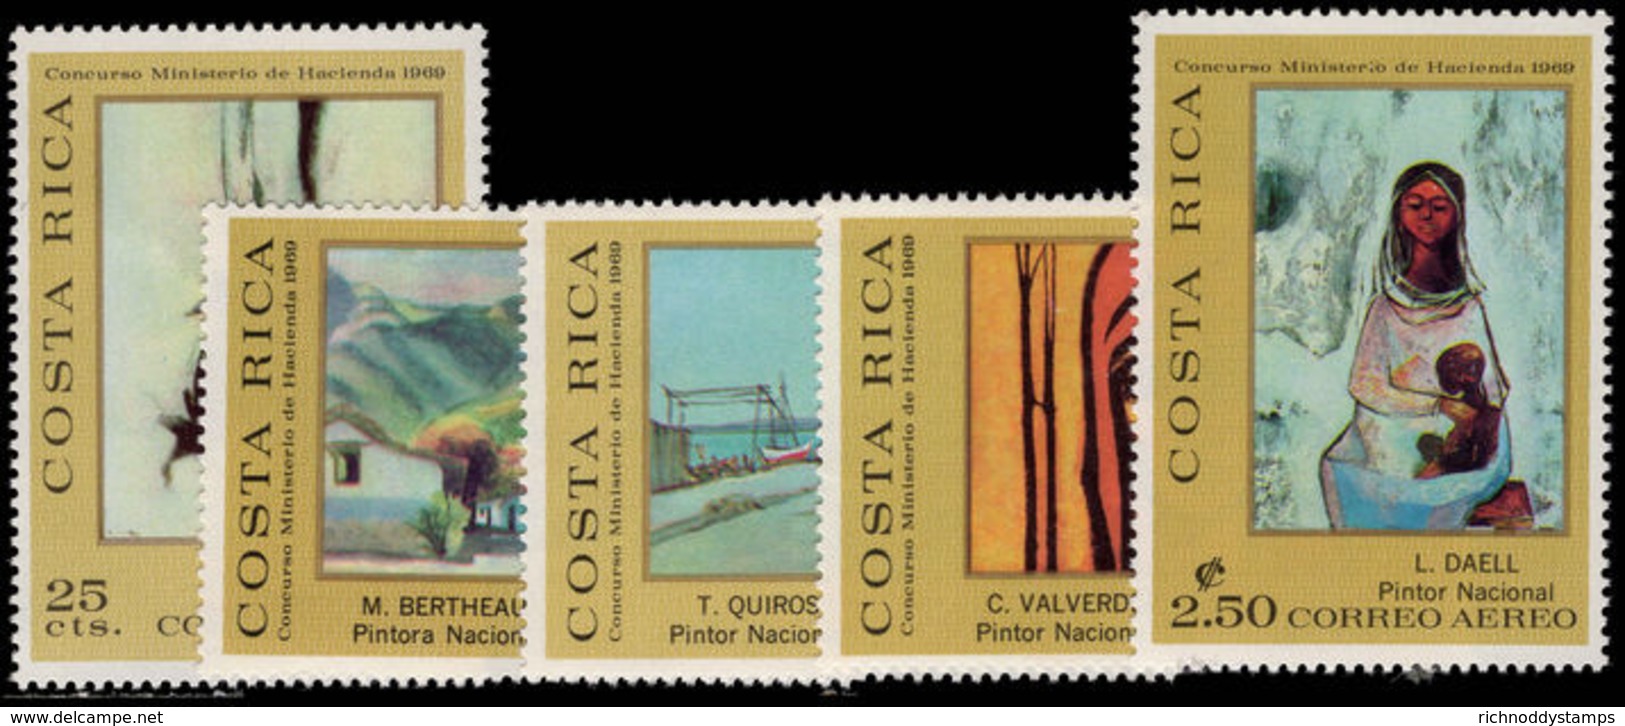 Costa Rica 1970 Costa Rican Paintings Unmounted Mint. - Costa Rica